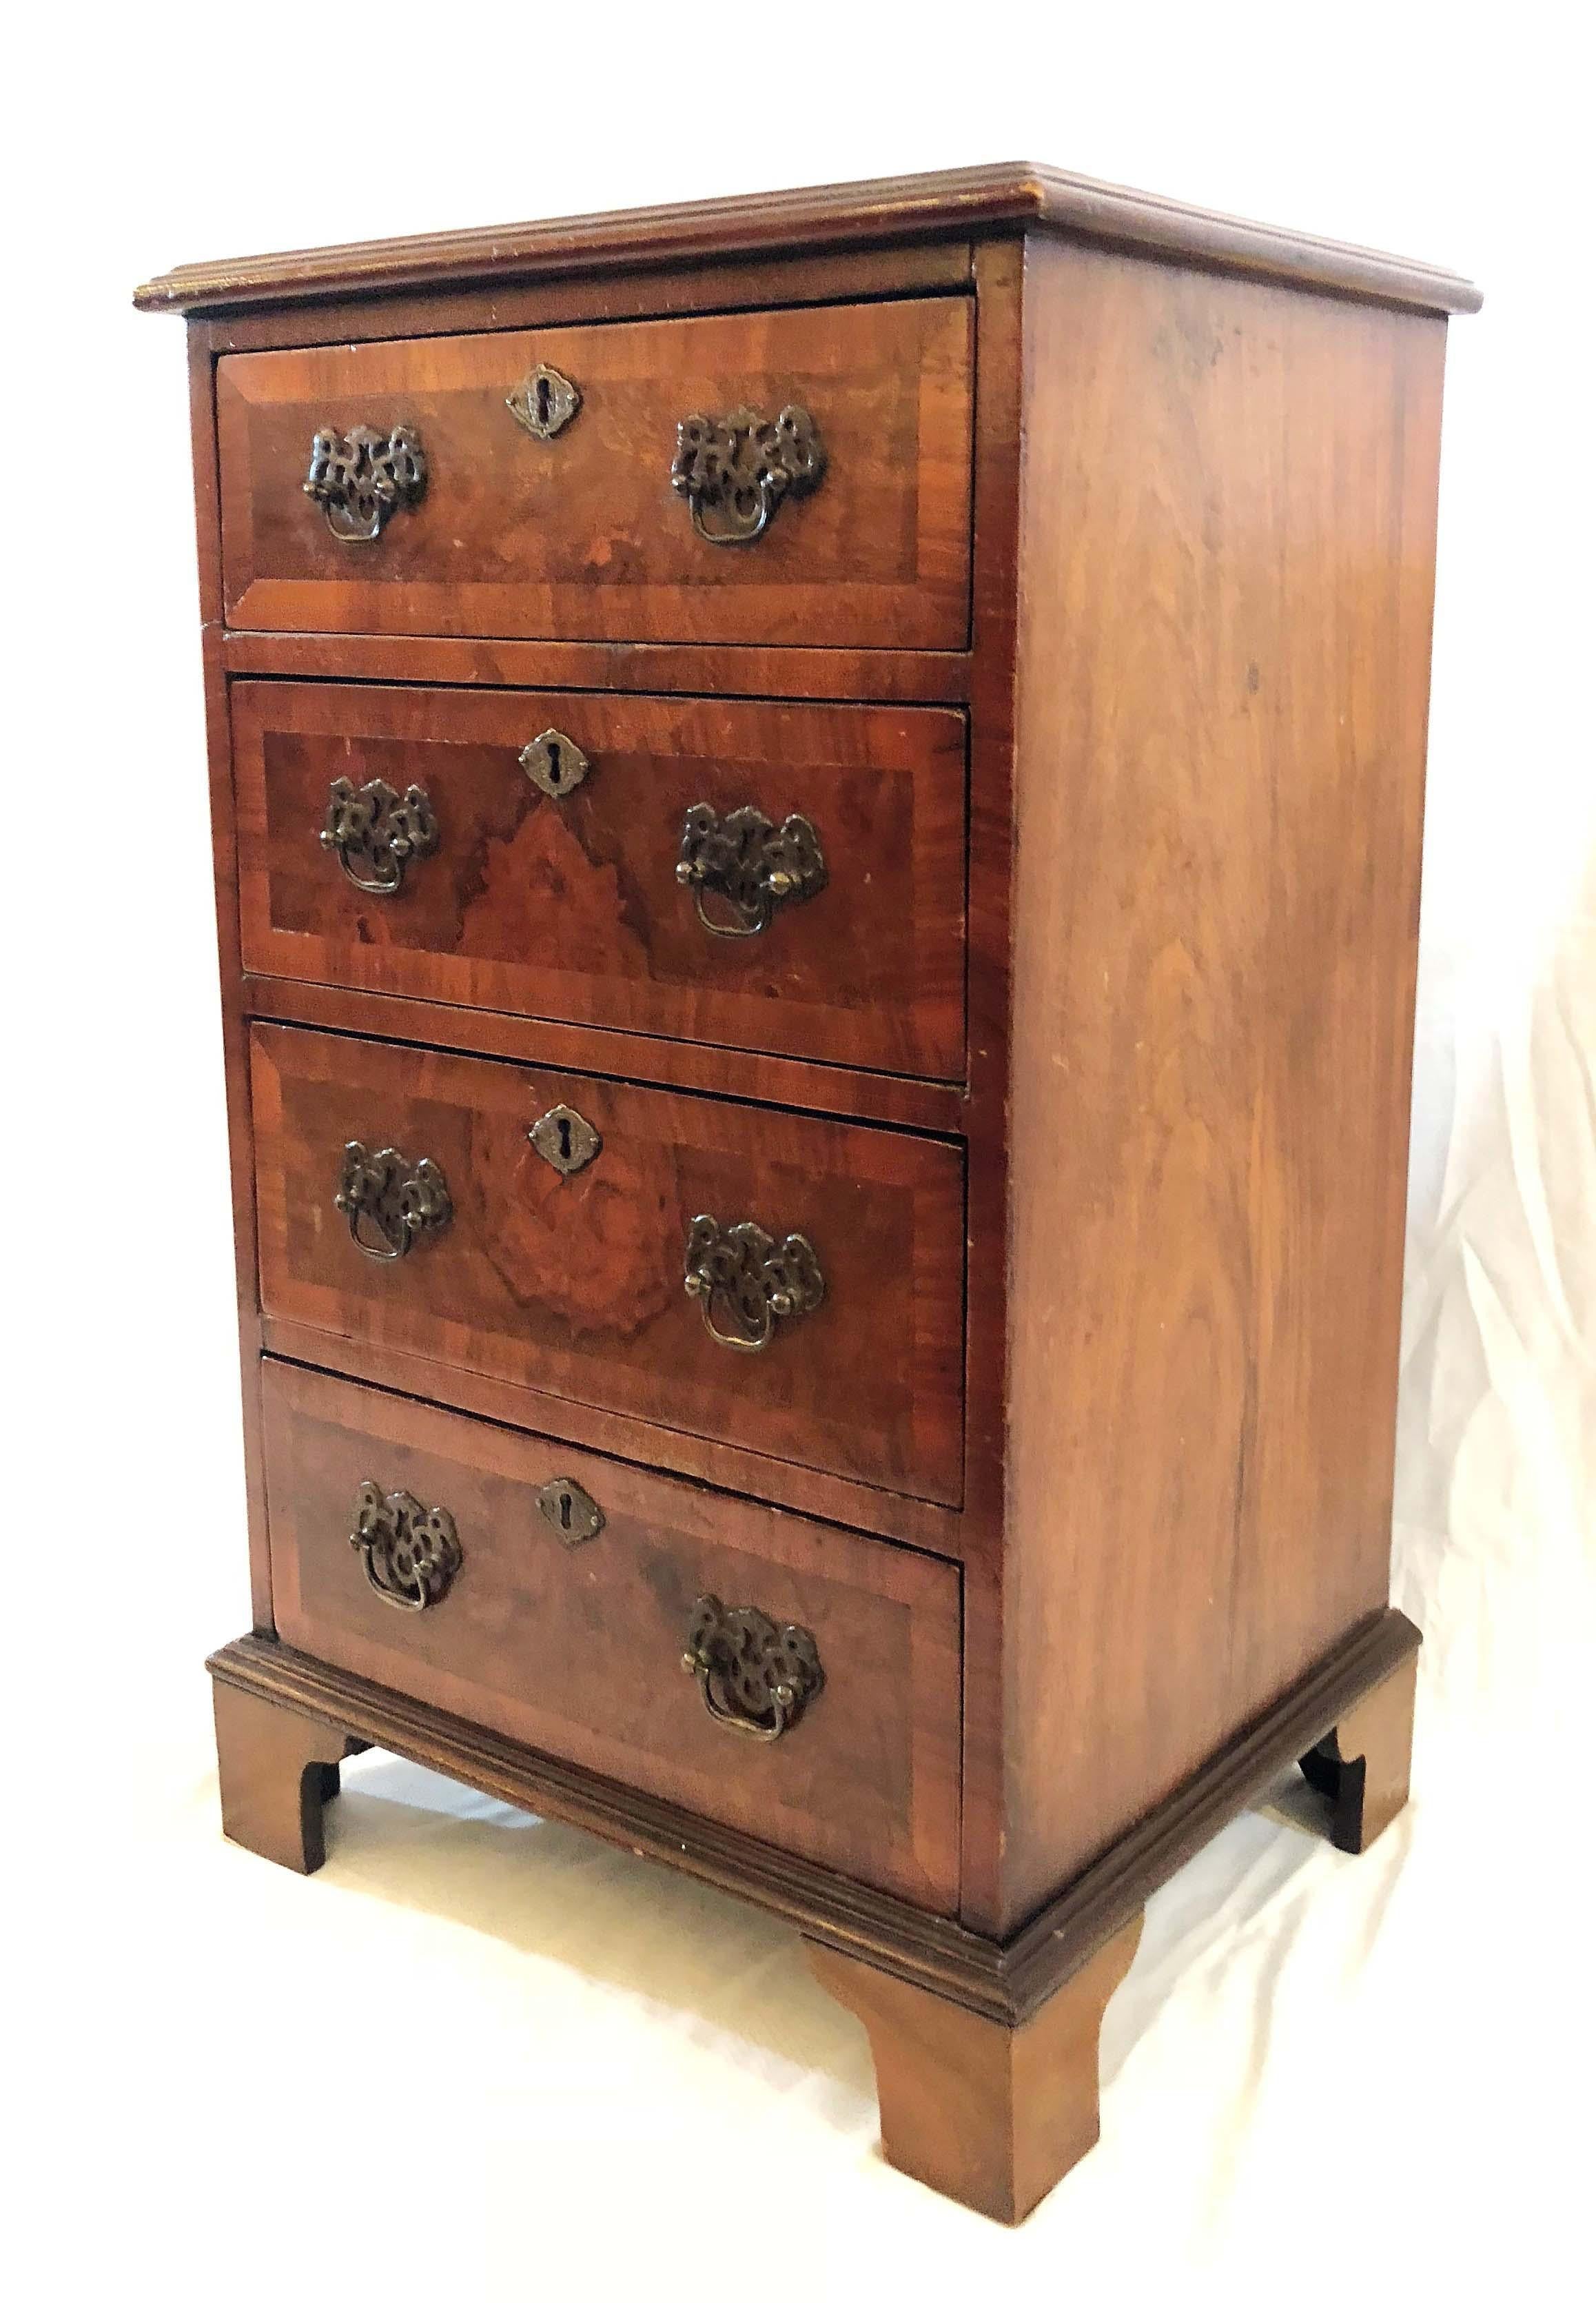 Antique English walnut small chest of drawers.